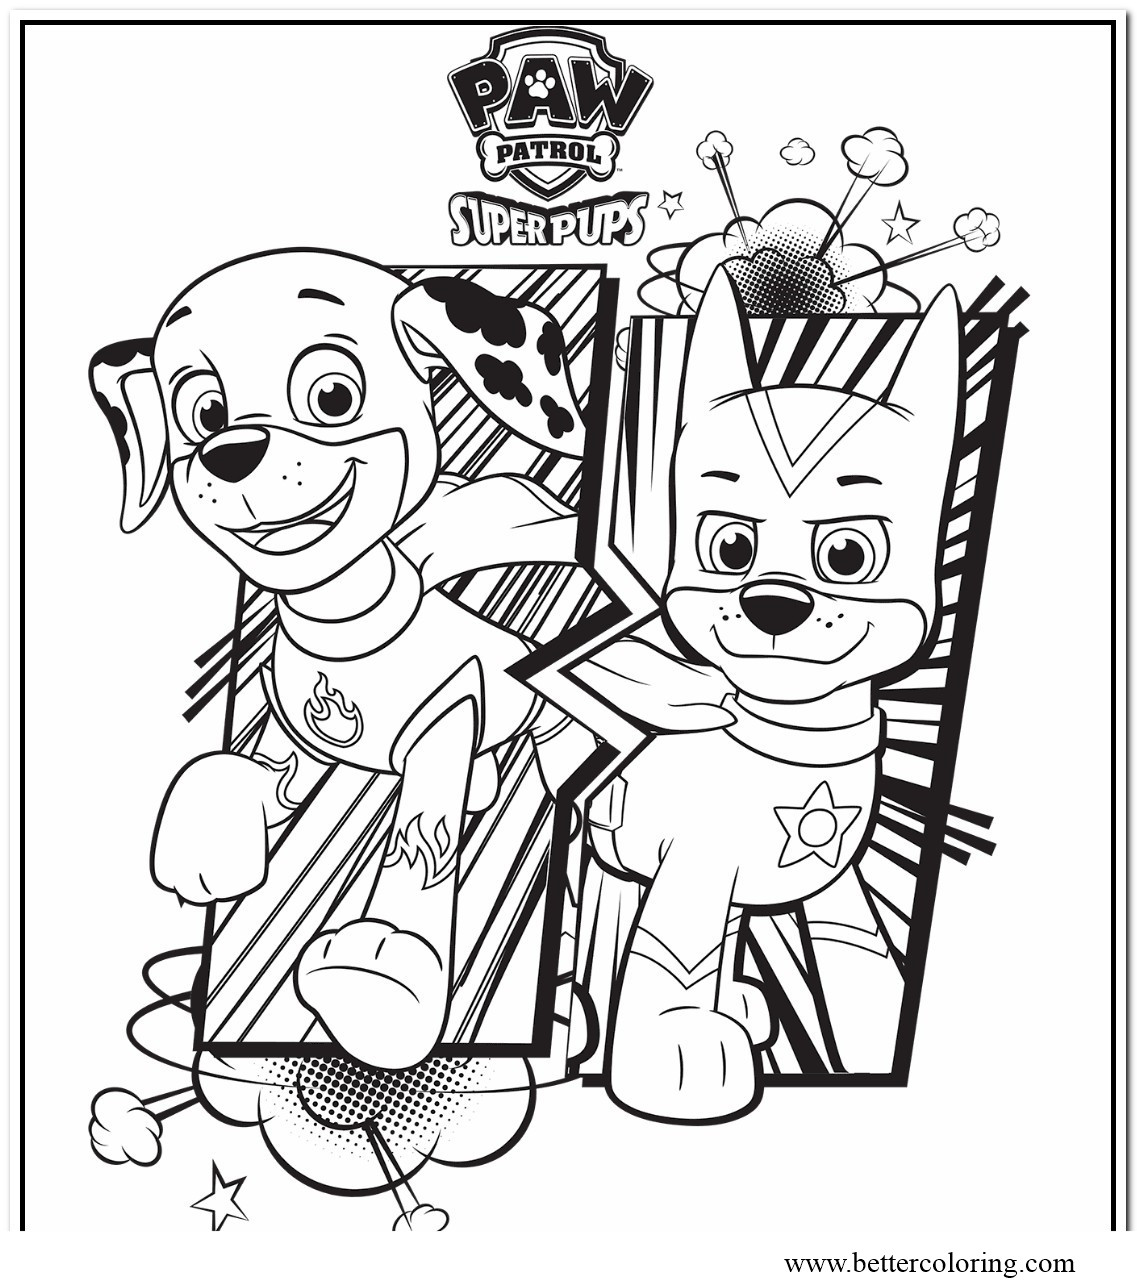 Free Characters from Paw Patrol Super Pups Coloring Pages printable